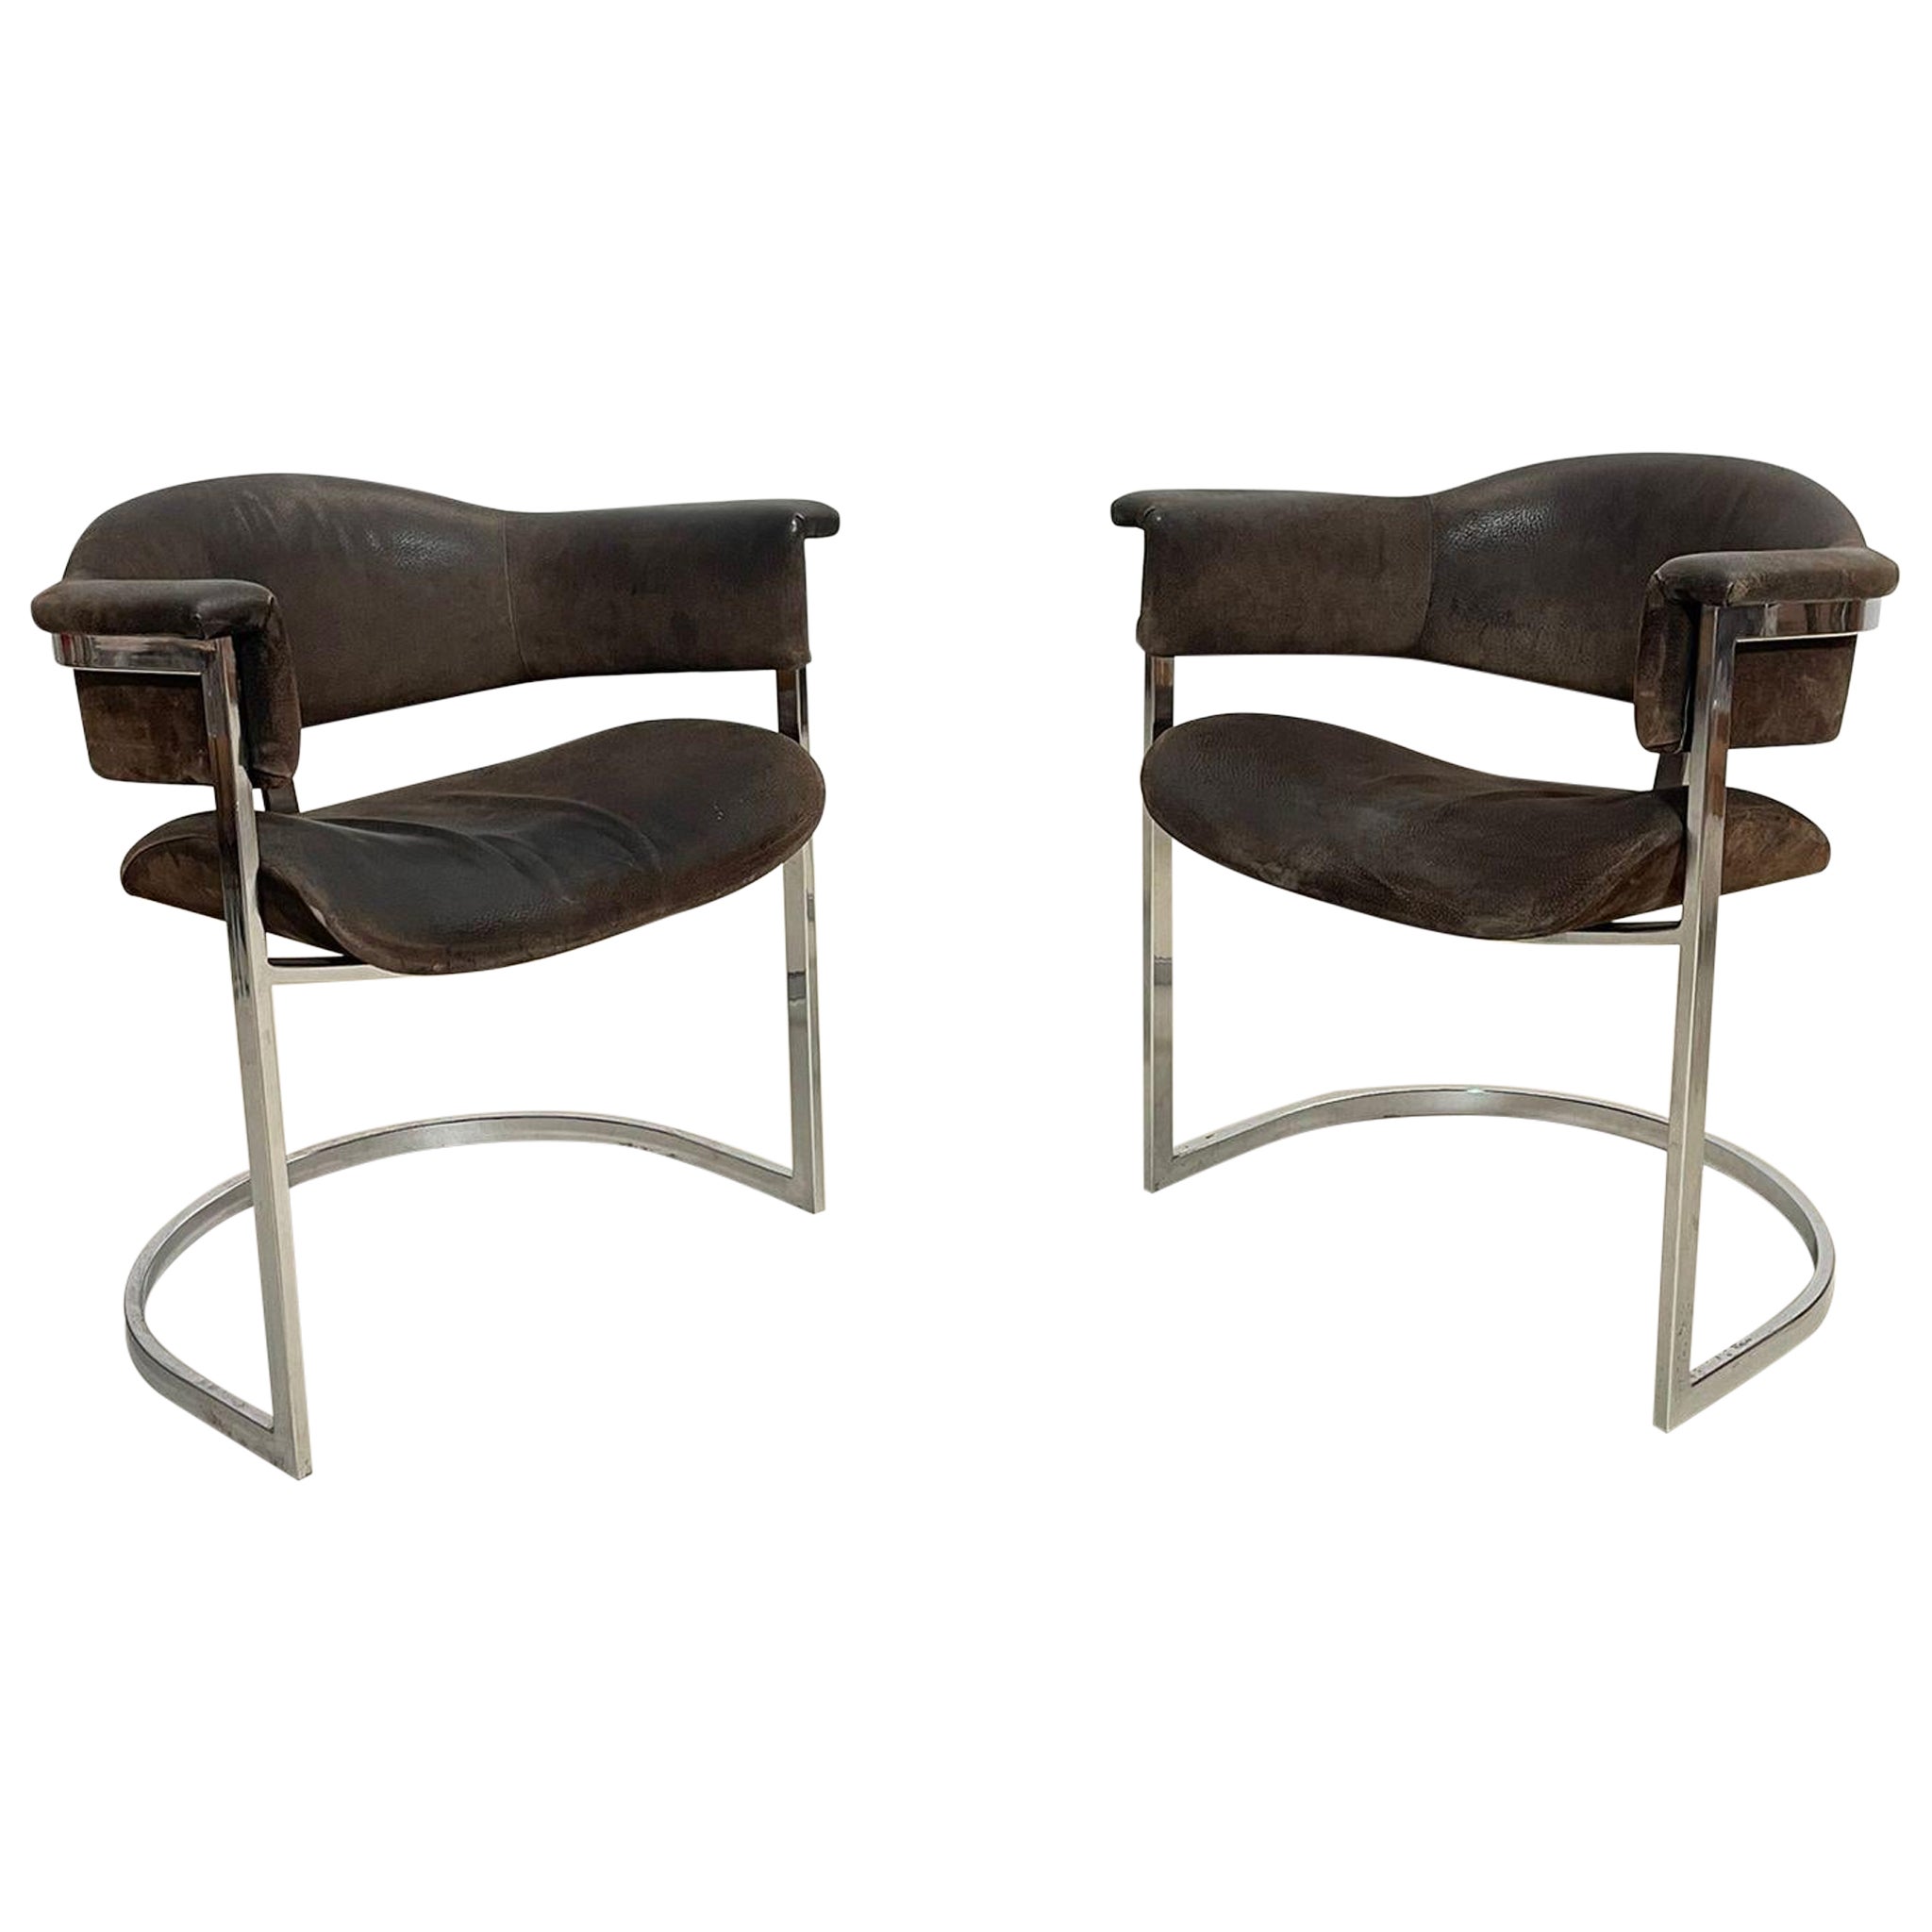 Pair of Chrome & Leather Armchairs by Vittorio Introini for Mario Sabot, 1970s For Sale